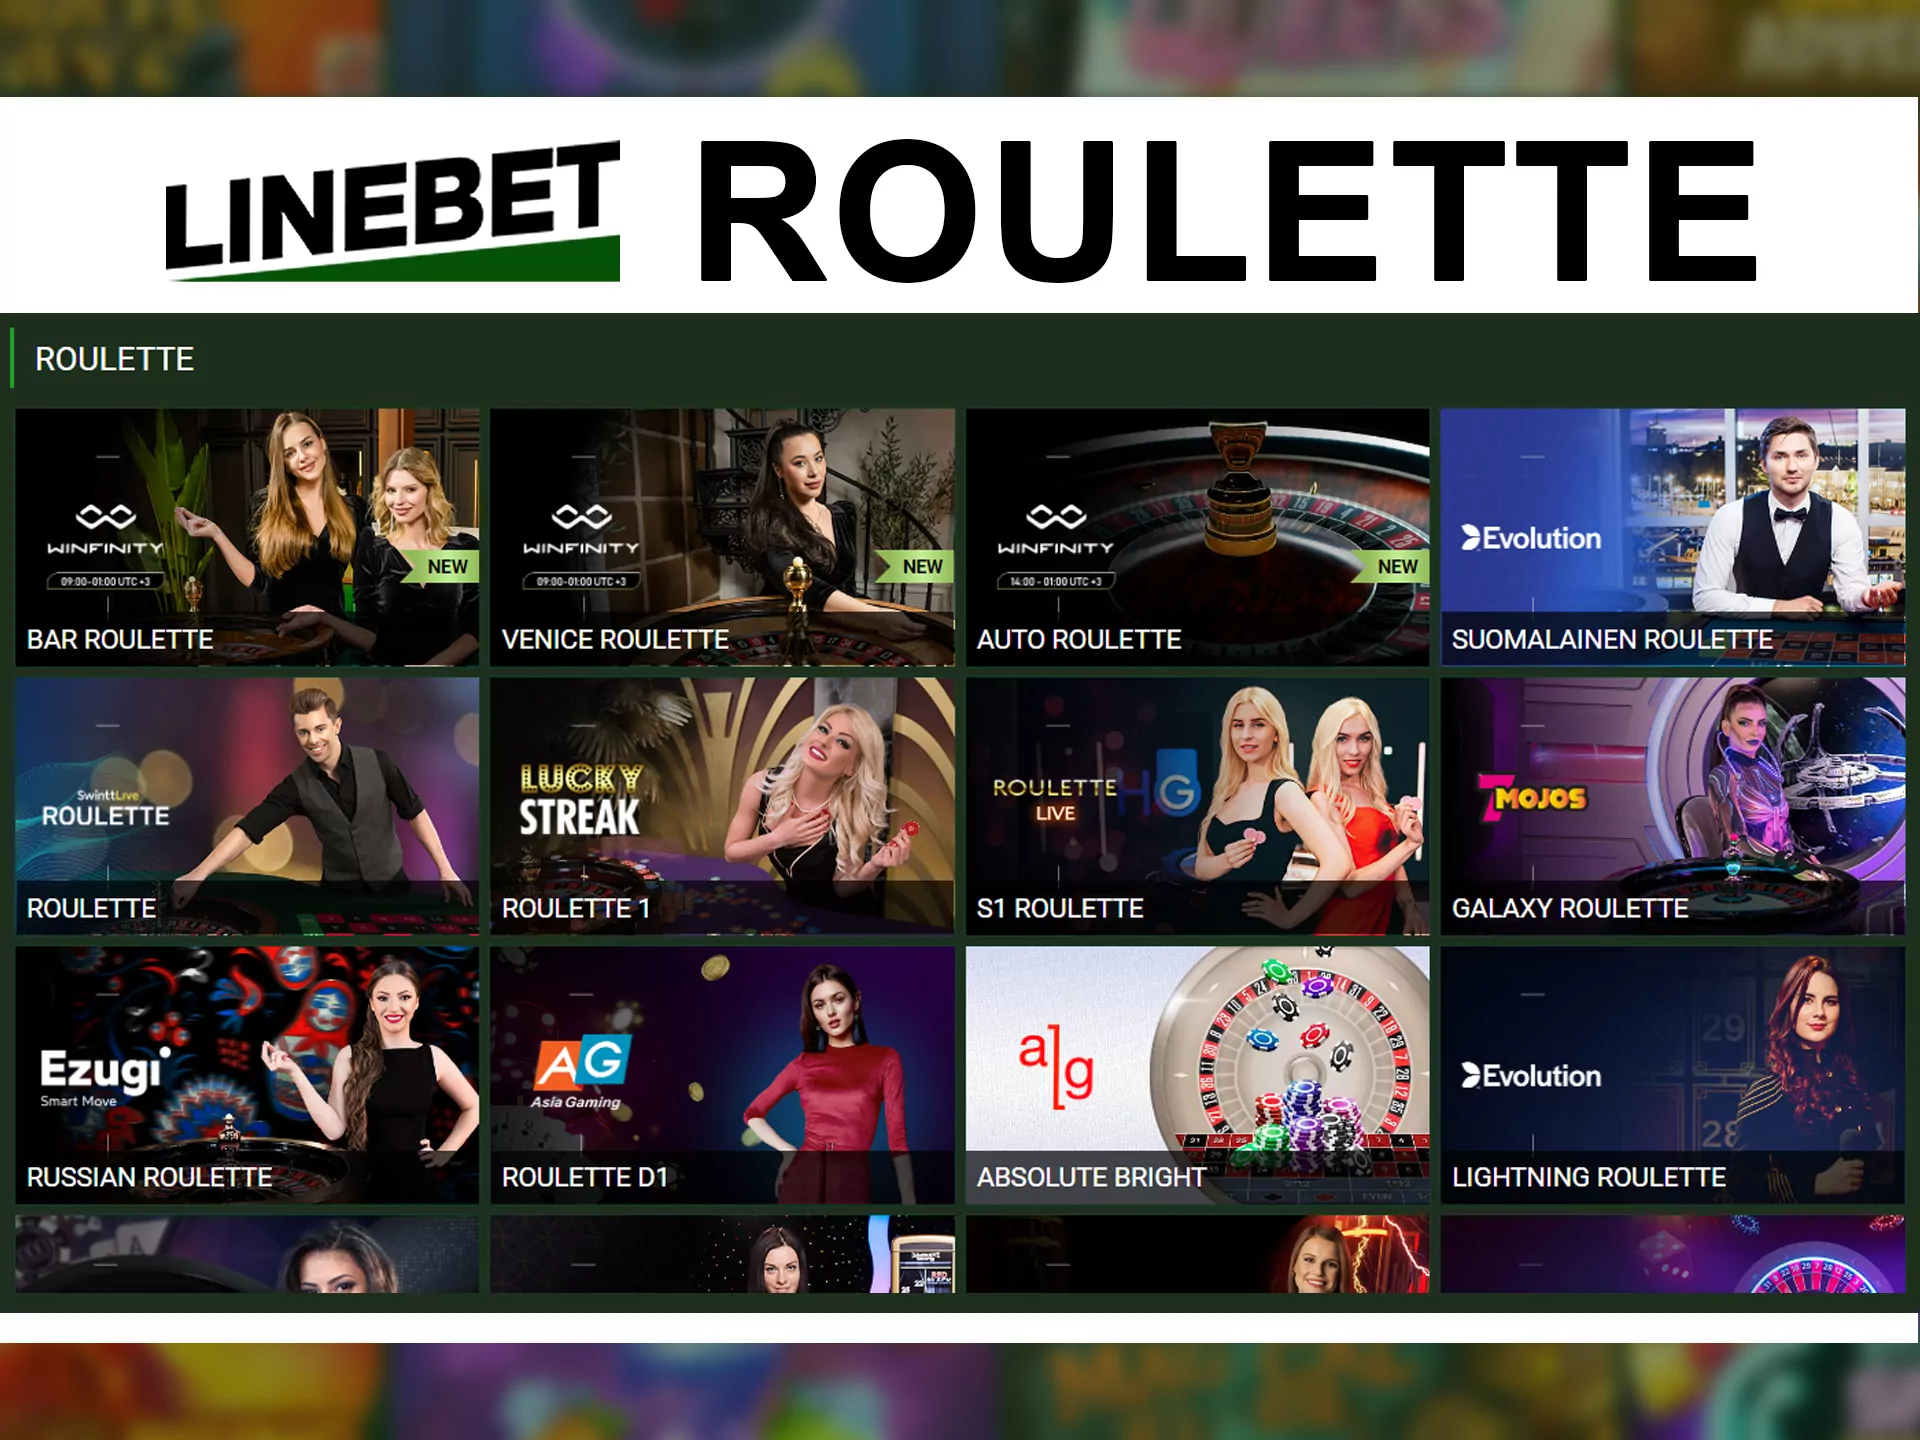 Play big in roulette at Linebet.